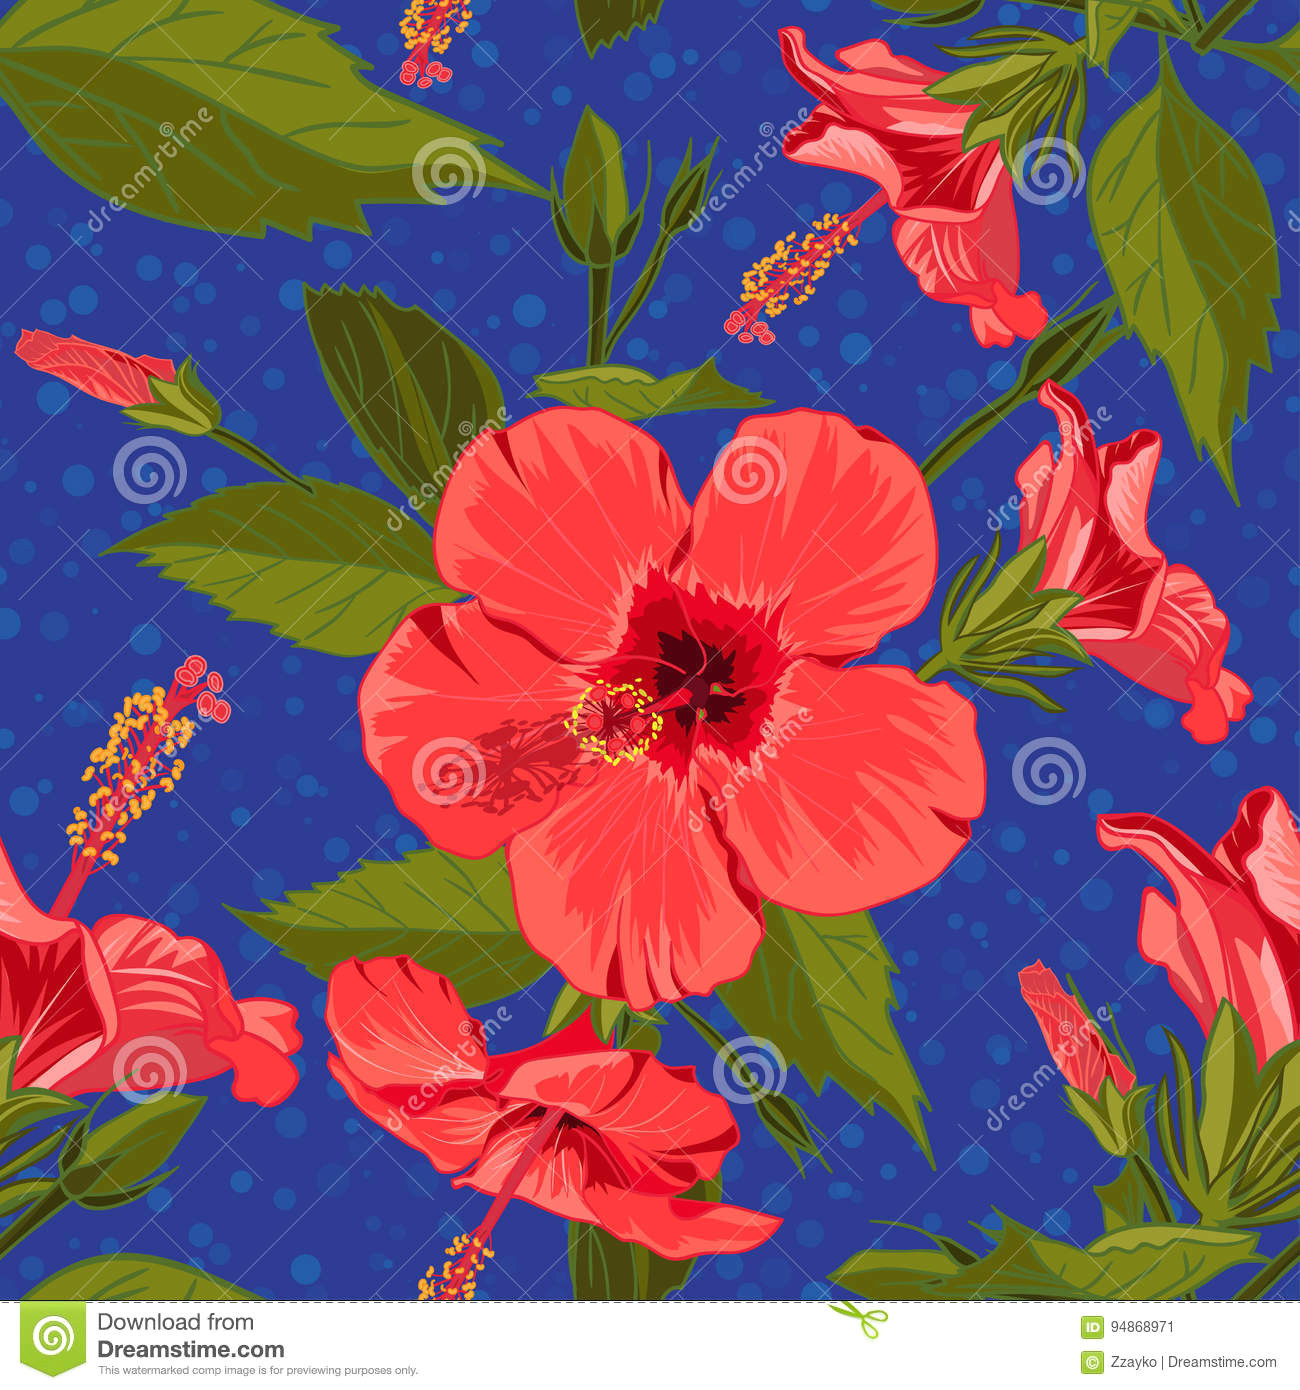 Drawings Of Jungle Flowers Seamless Hand Drawn Tropical Pattern with Jungle Exotic Hibiscus